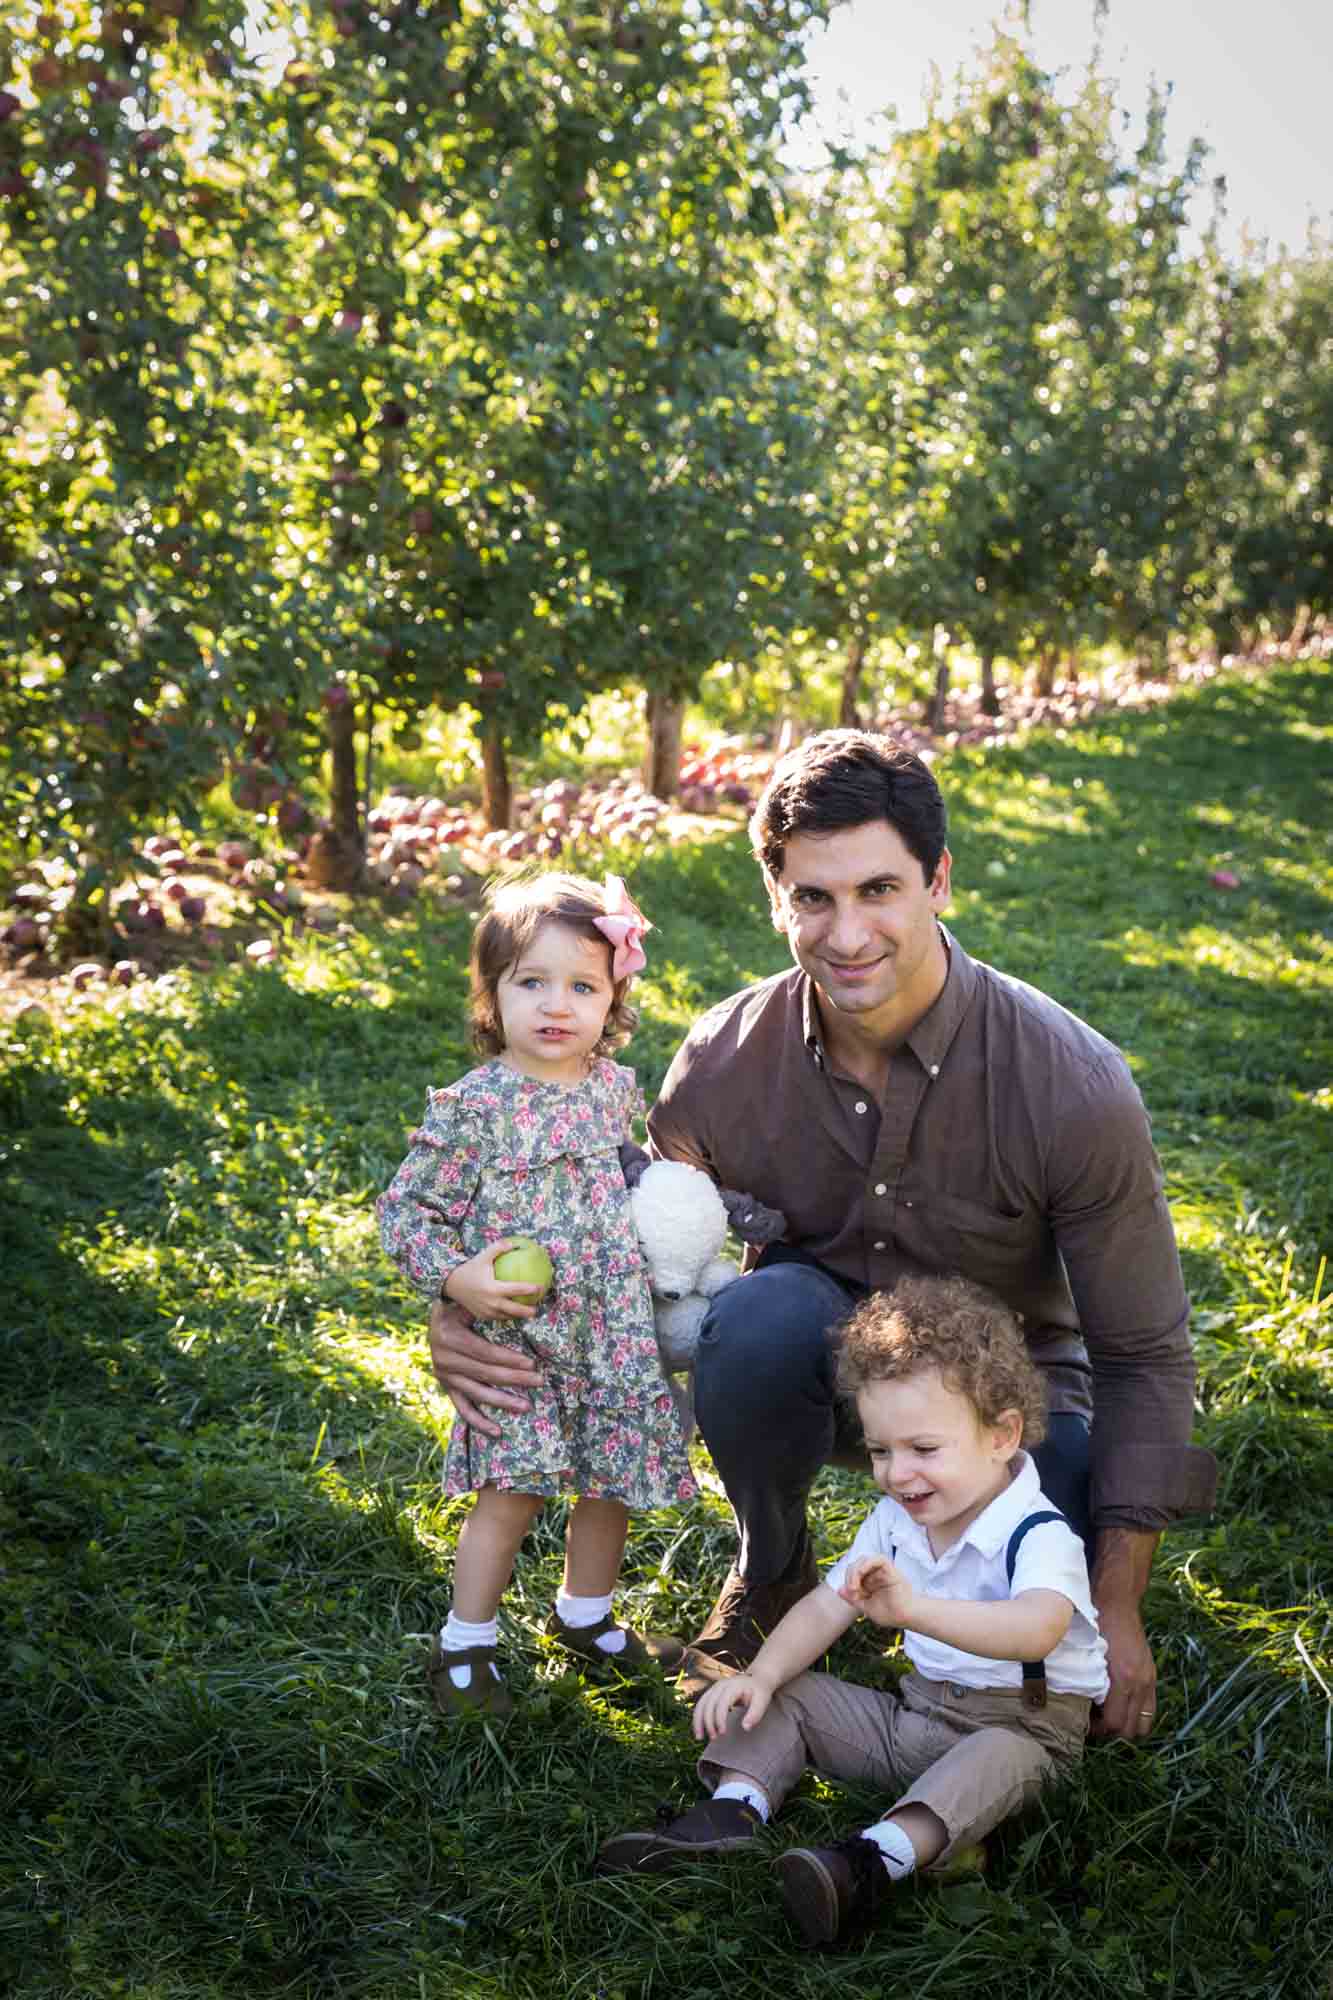 Father with two toddlers in an orchard for an article on tips for apple picking family photos